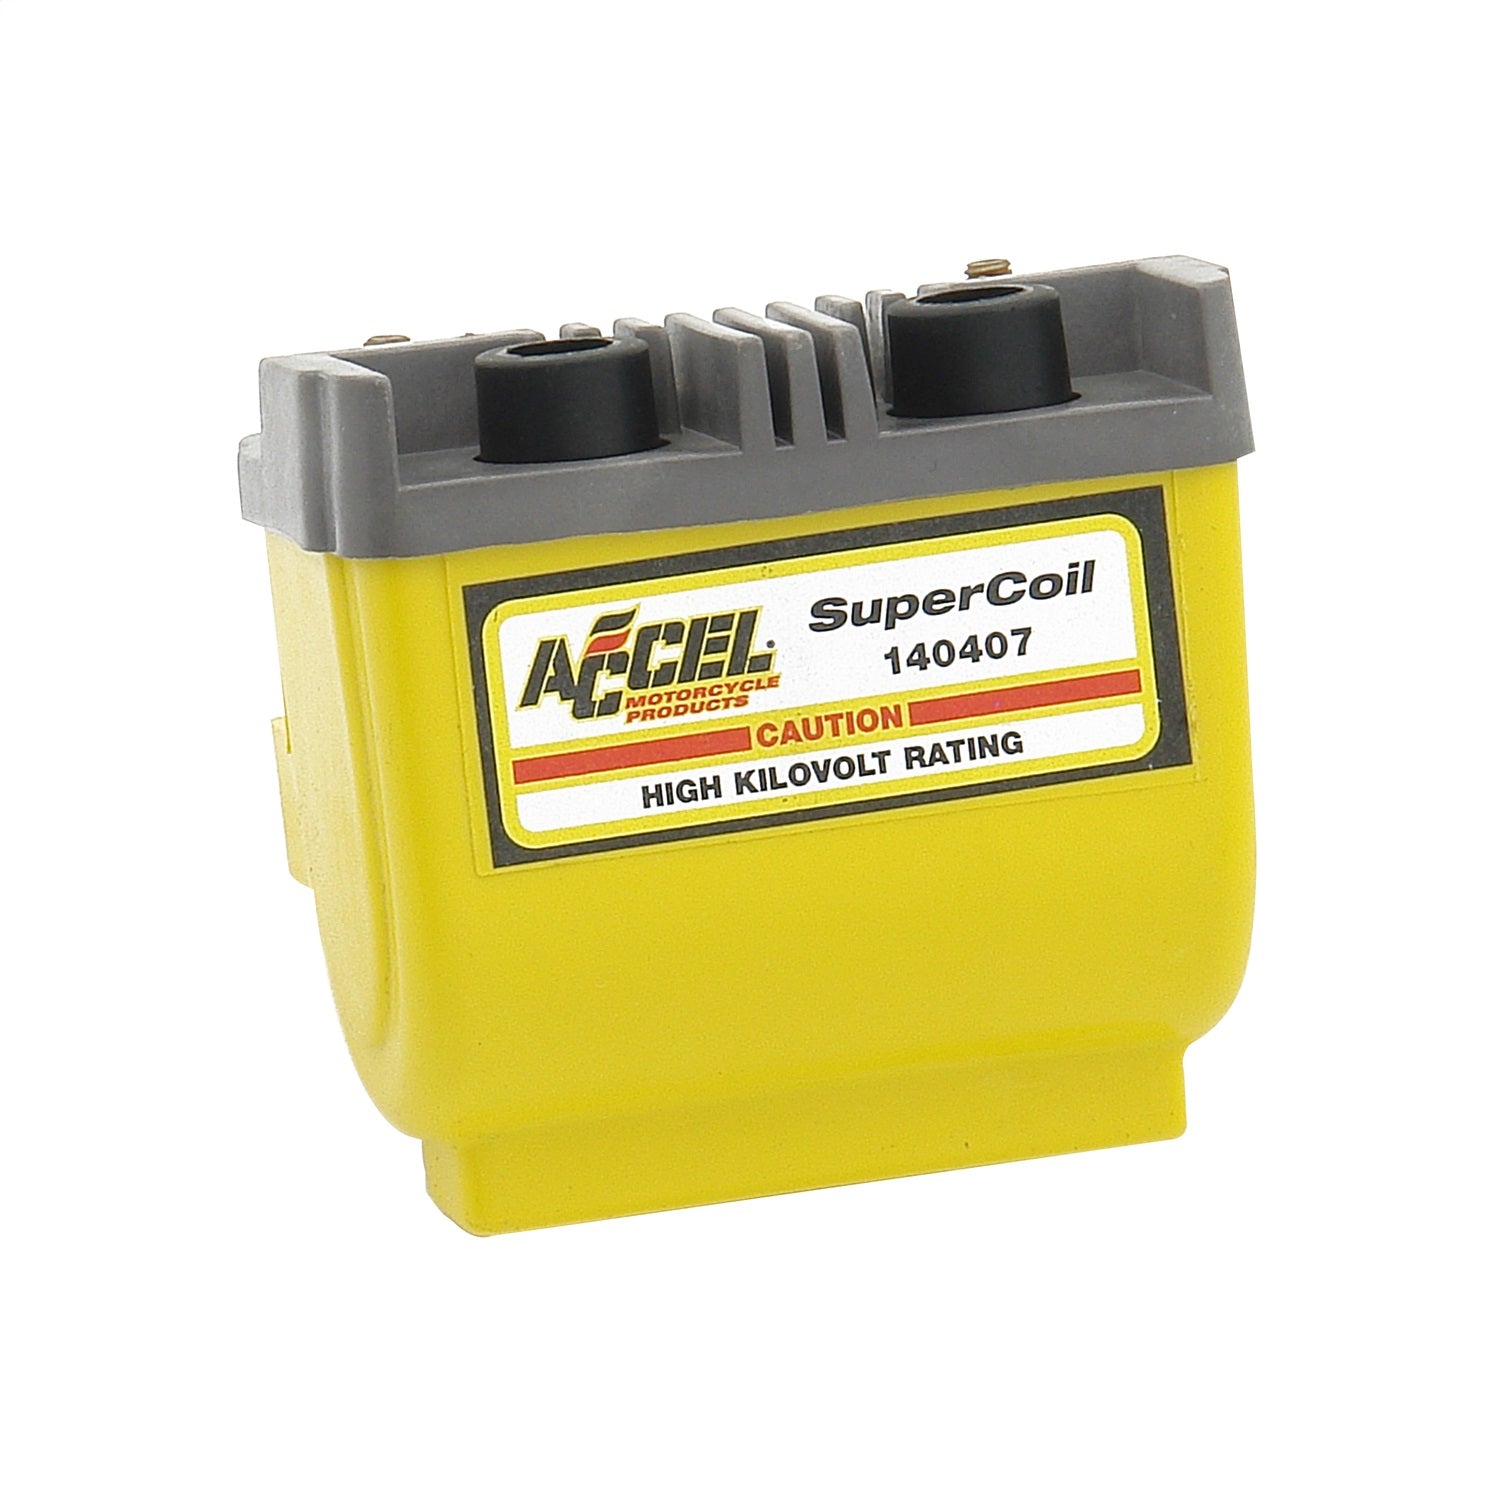 ACCEL 140407 Motorcycle SuperCoil